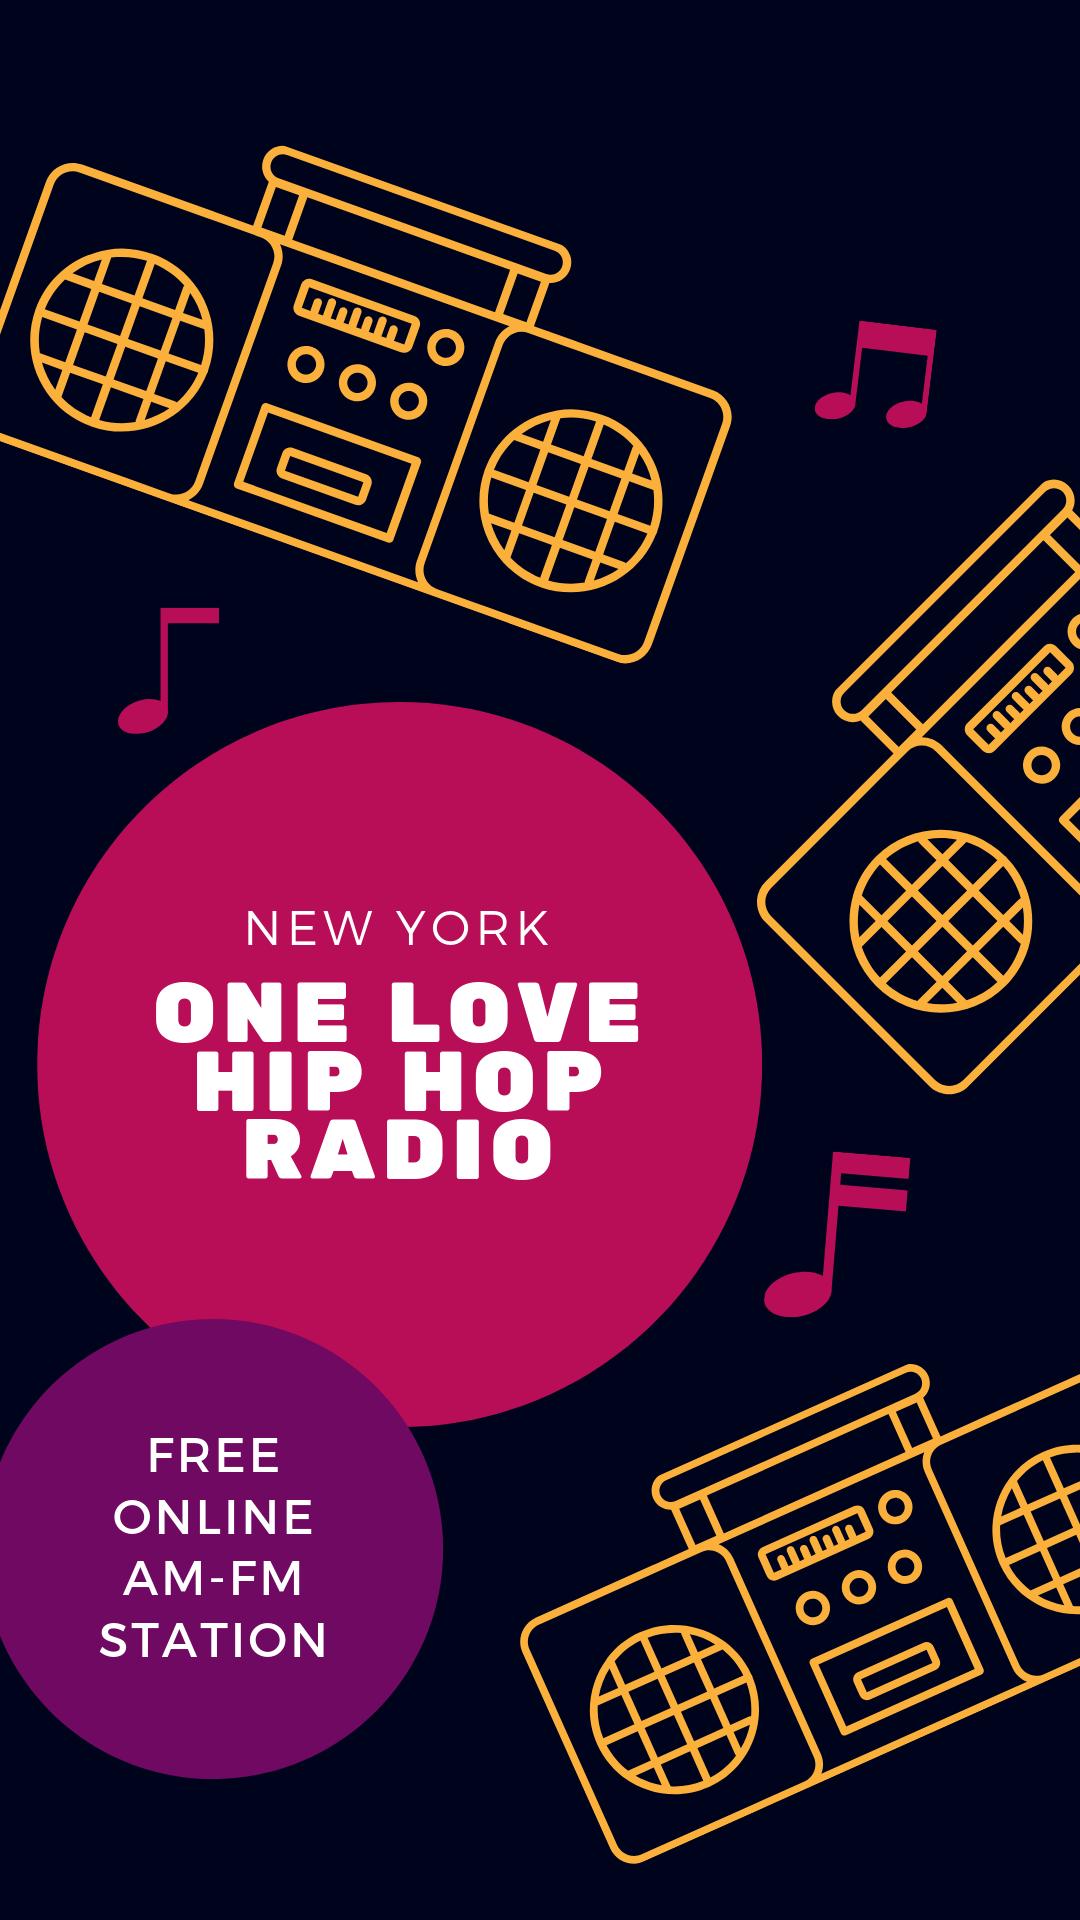 One Love Hip Hop Radio. Online Free 24/7 New York for Android - APK Download